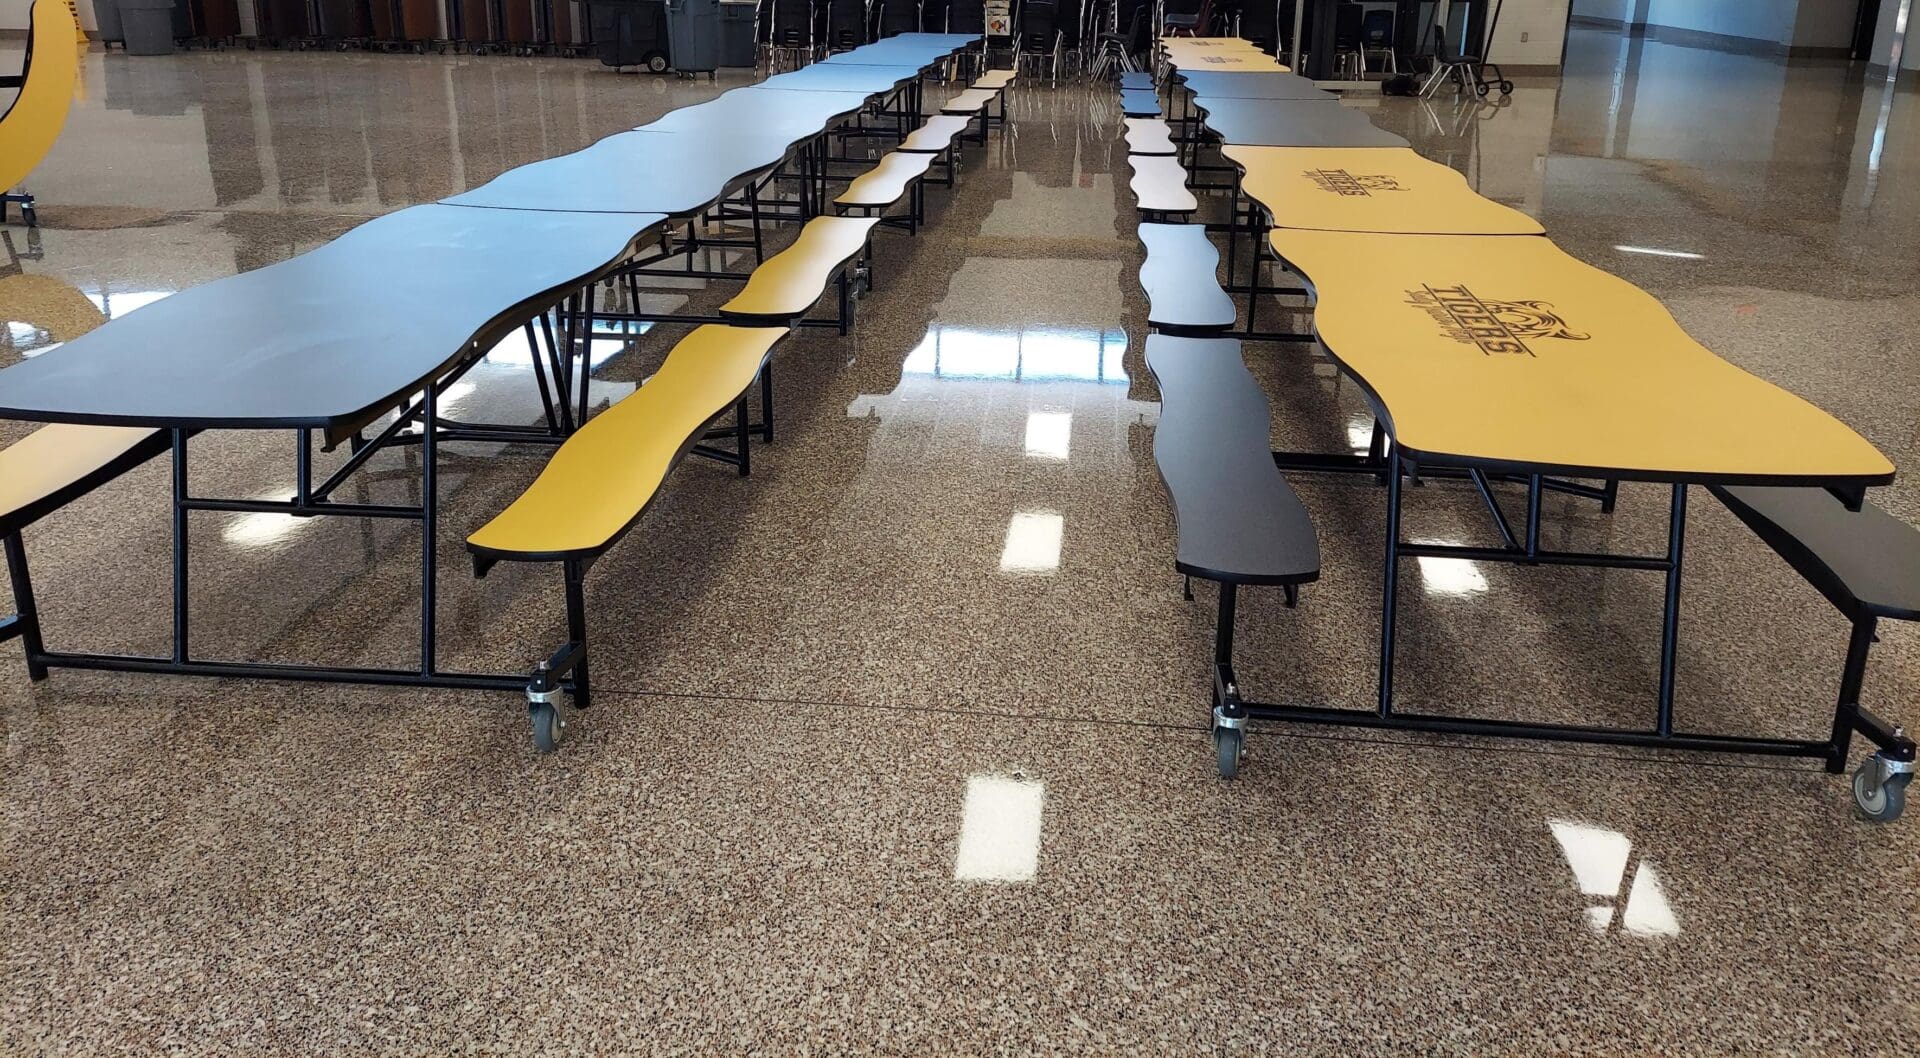 A group of tables with benches in the middle.